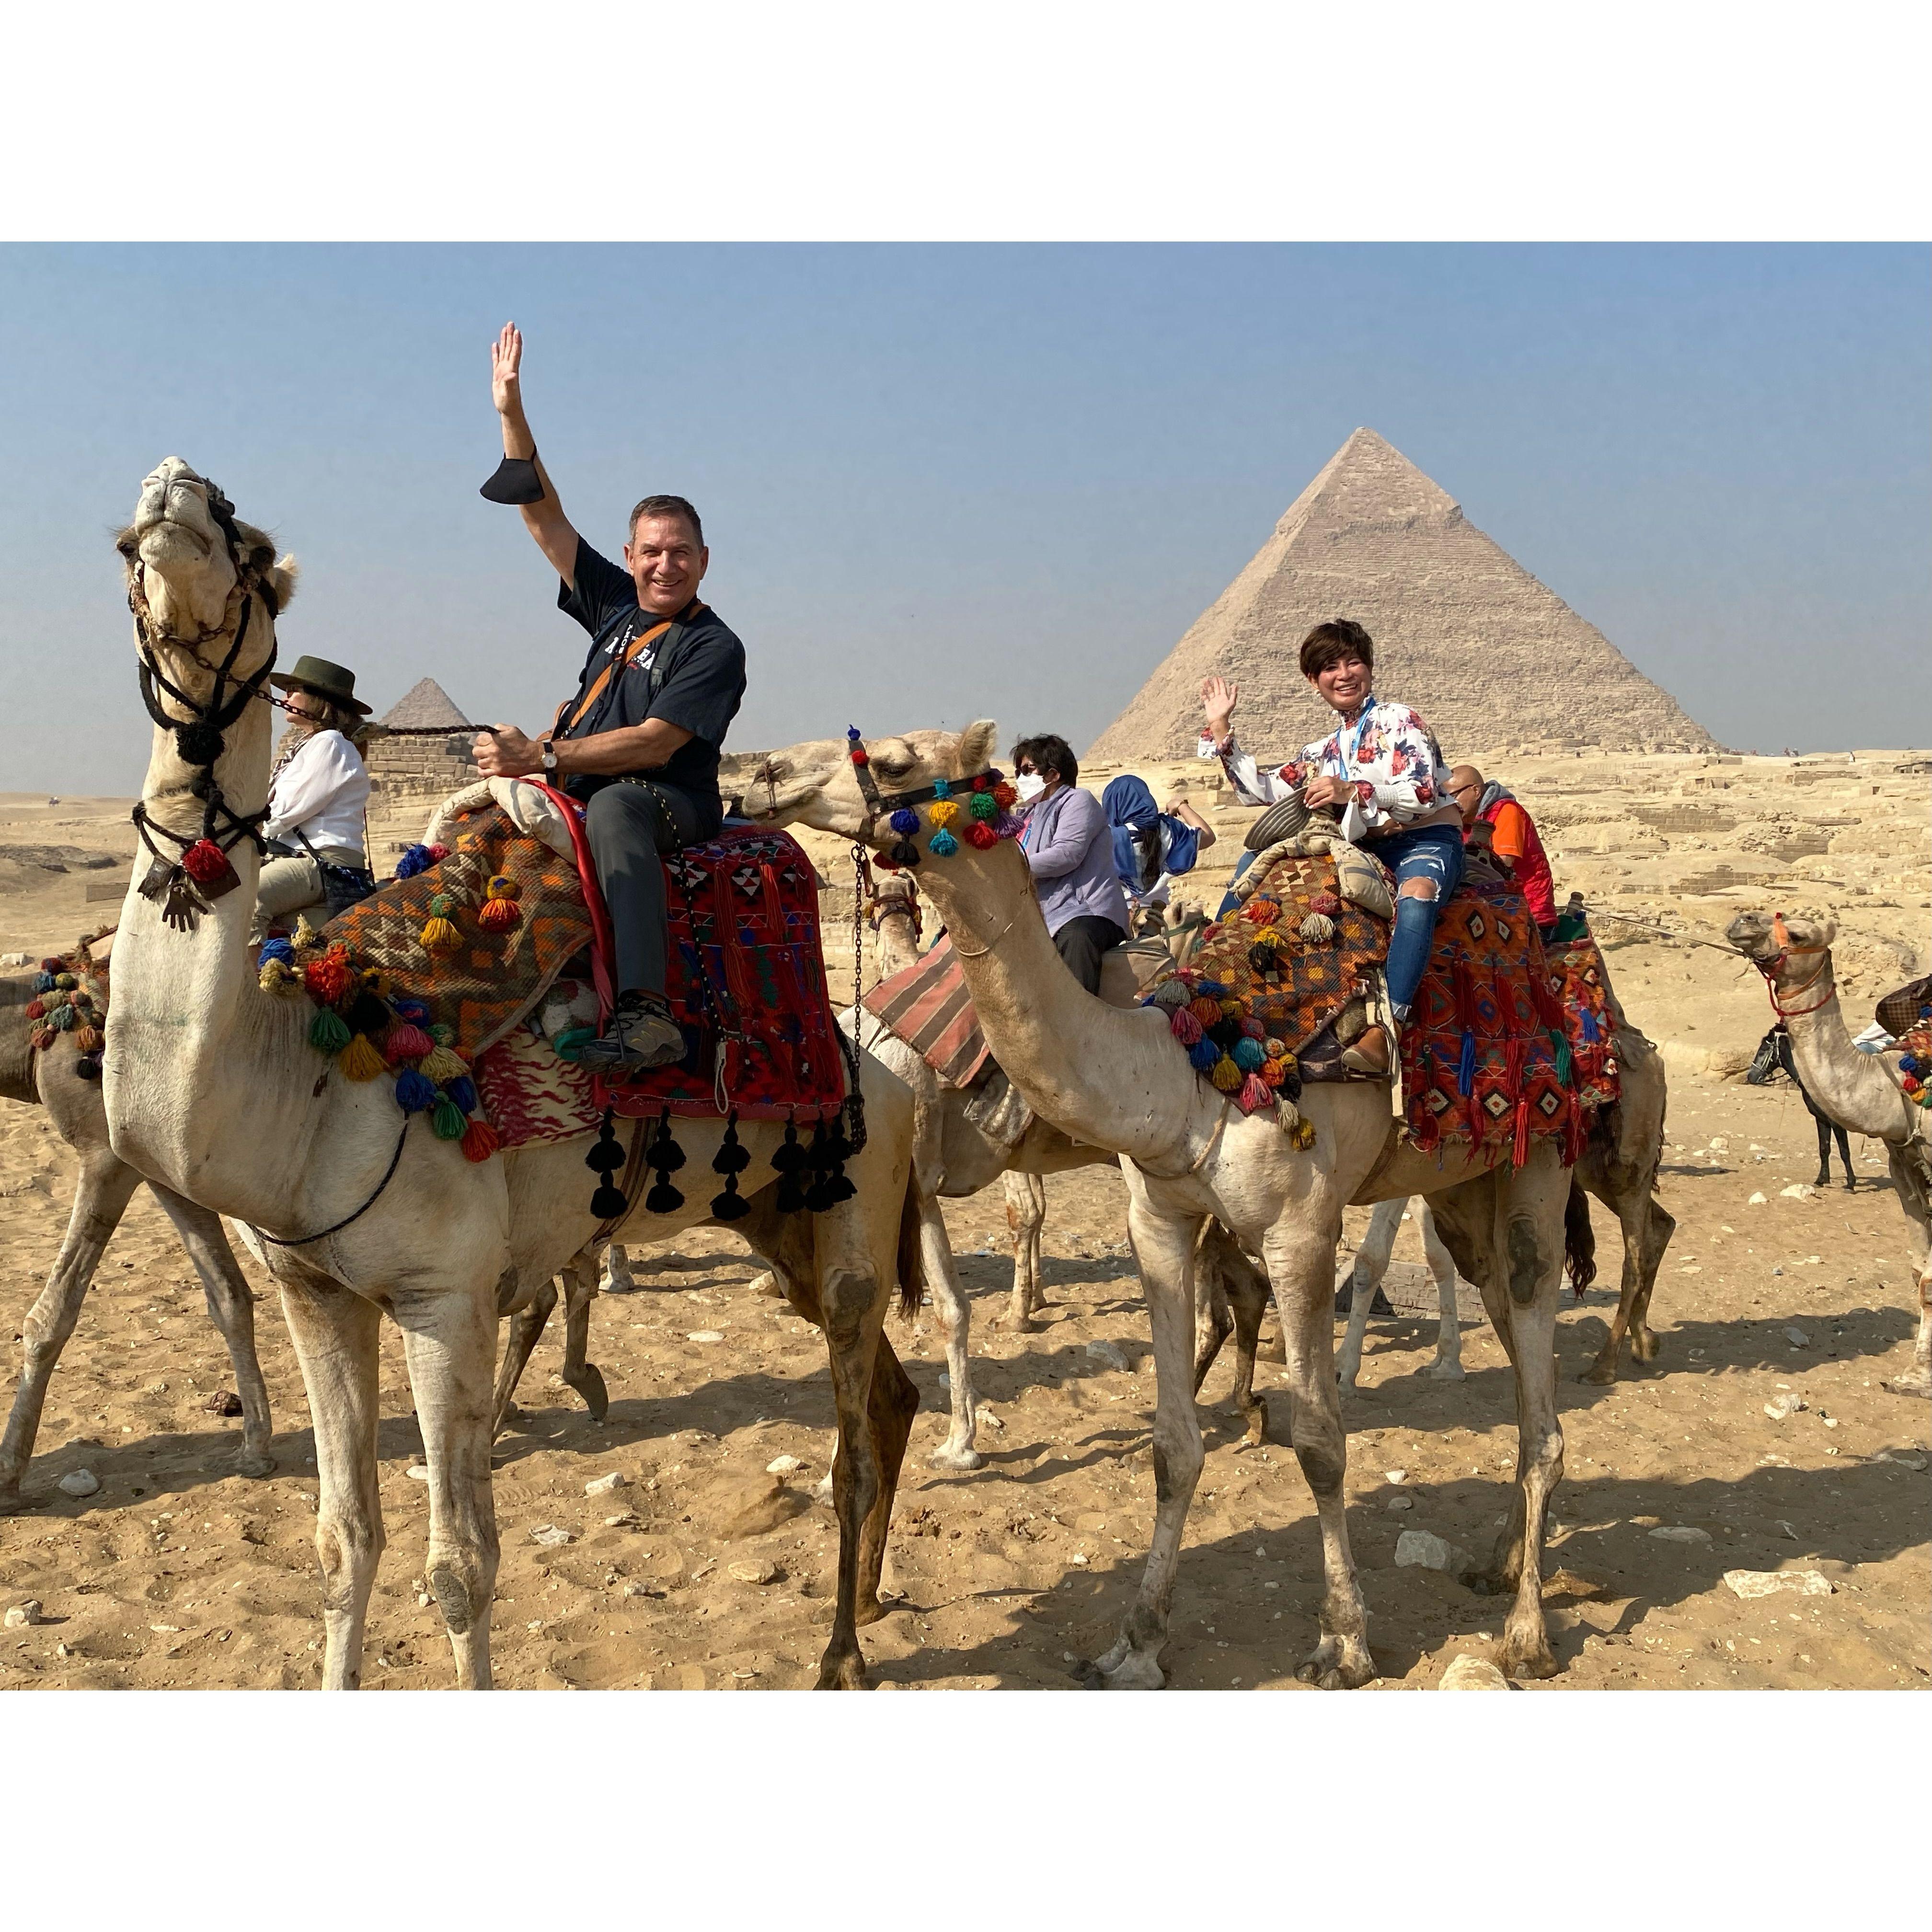 Our 1st camel ride with Giza's Pyramids at the background- Nov. 2021